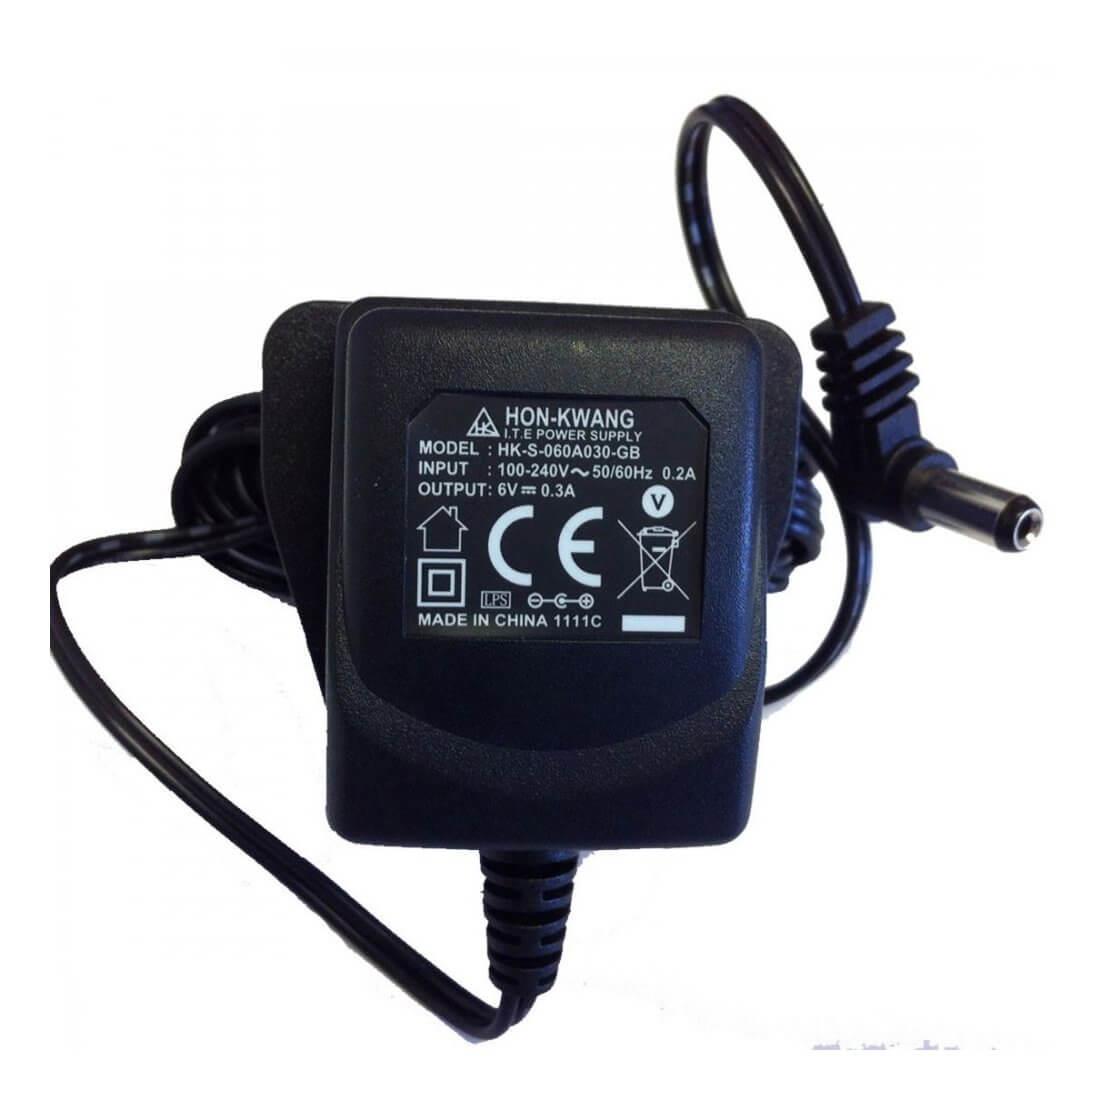 Power Adapter for Home Safety Alert, Star Projectors, Sound Dial